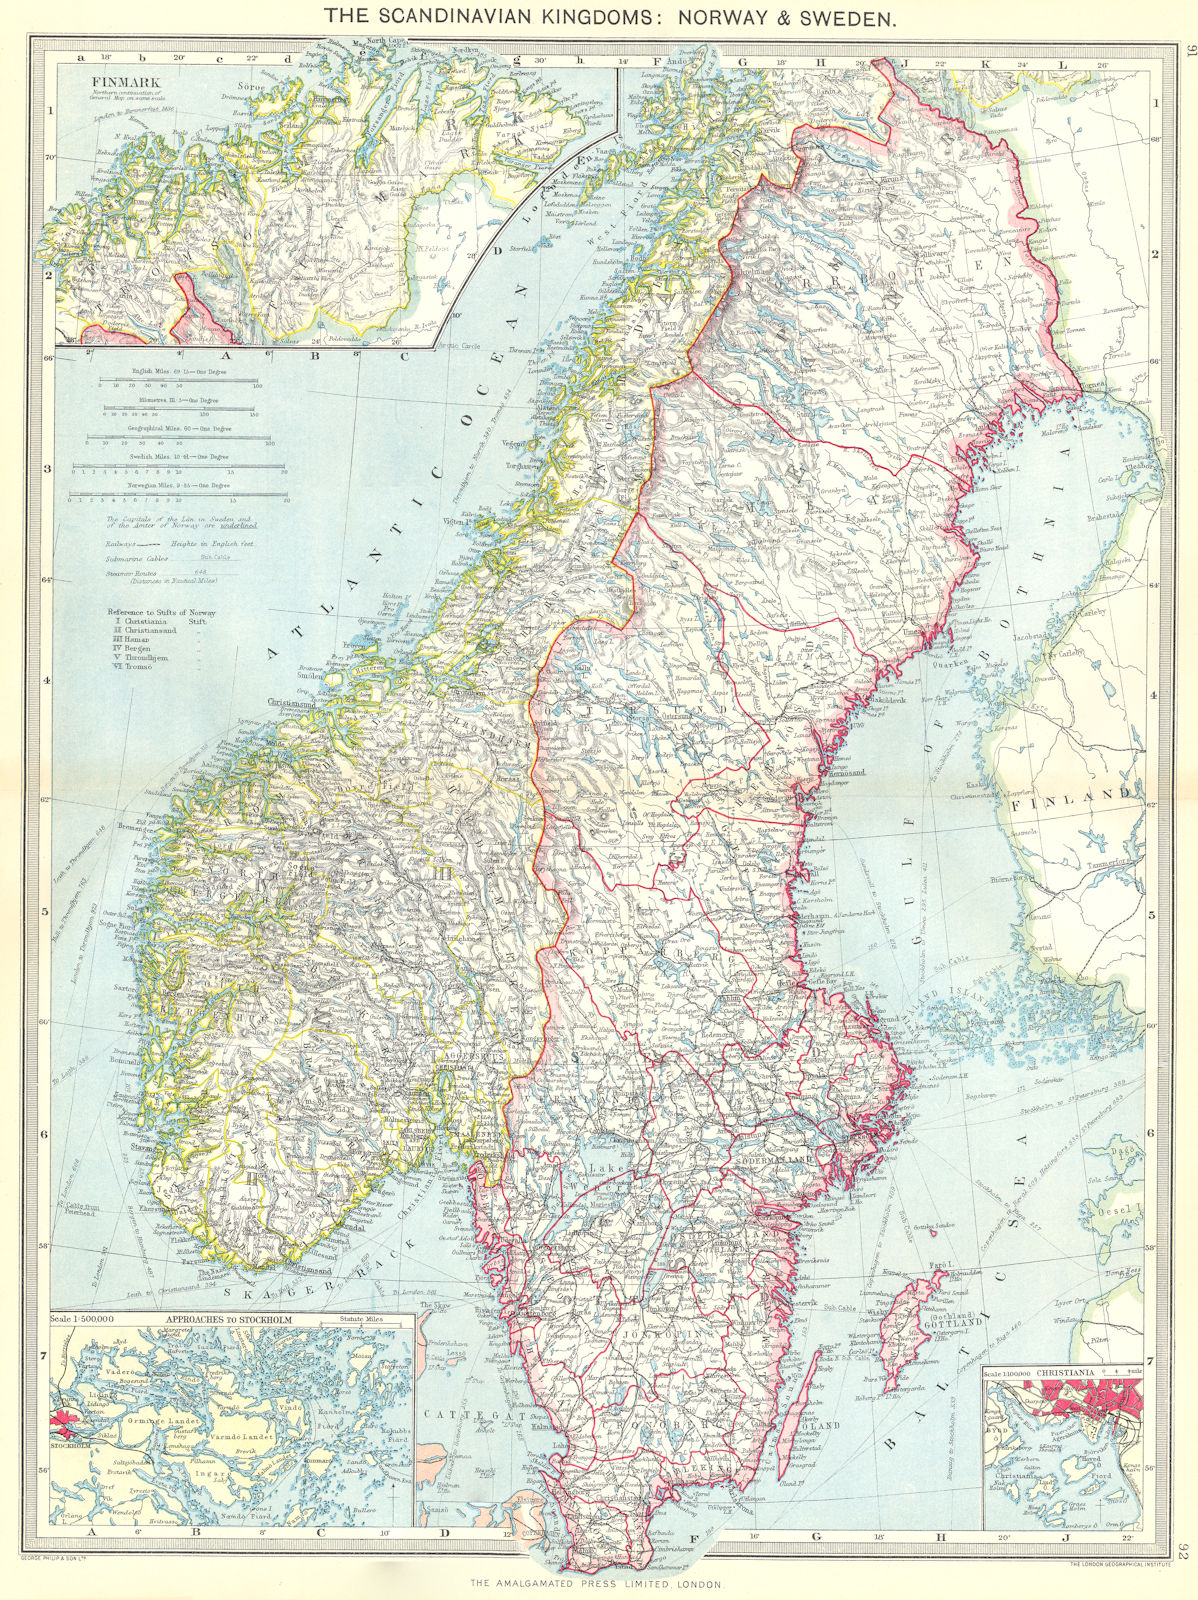 SCANDINAVIA. Norway and Sweden; Finmark; Stockholm; Oslo 1907 old antique map